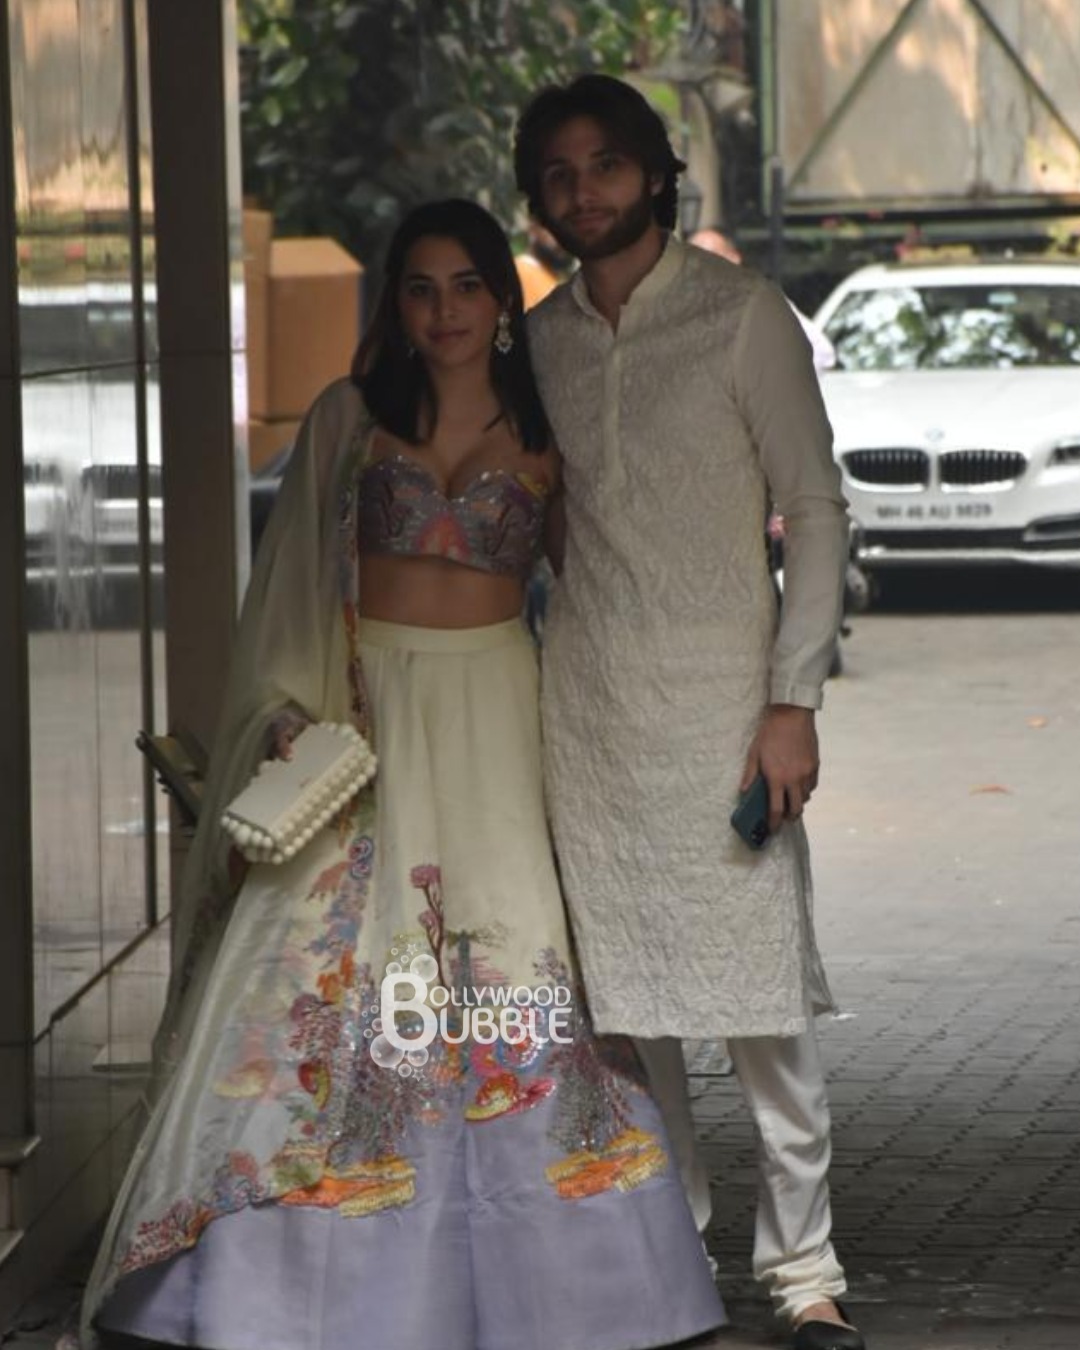 Aaliyah-Kashyap-arrives-in-style-with-boyfriend